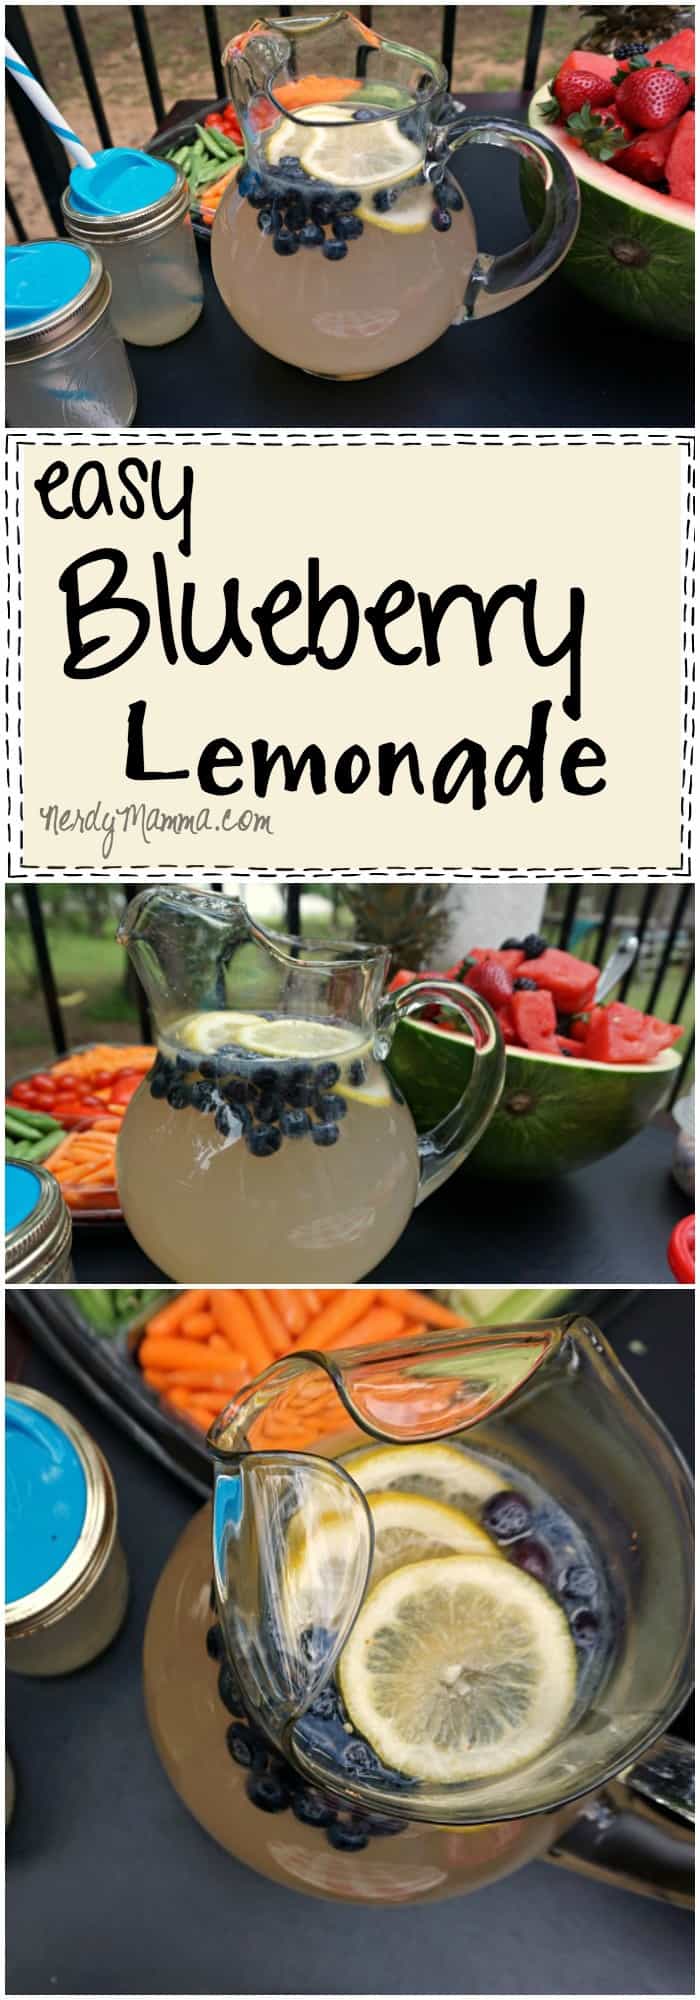 This recipe for easy blueberry lemonade is so simple--but so very yummy! I love it.